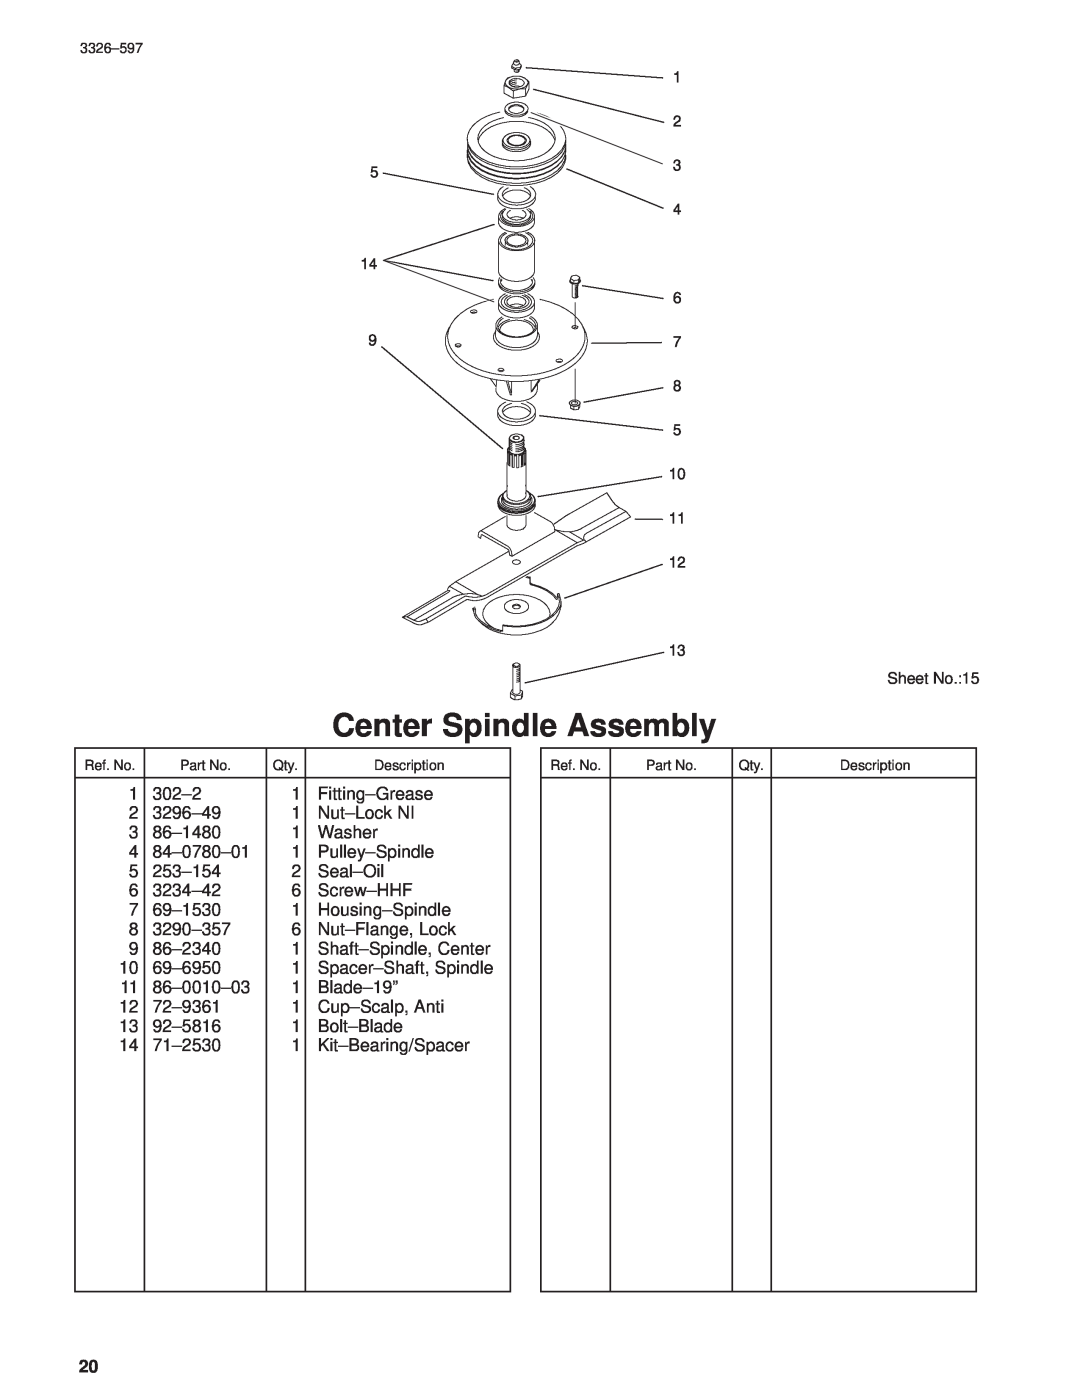 Toro 30402210000001 and Up manual Center Spindle Assembly, Sheet No.15 